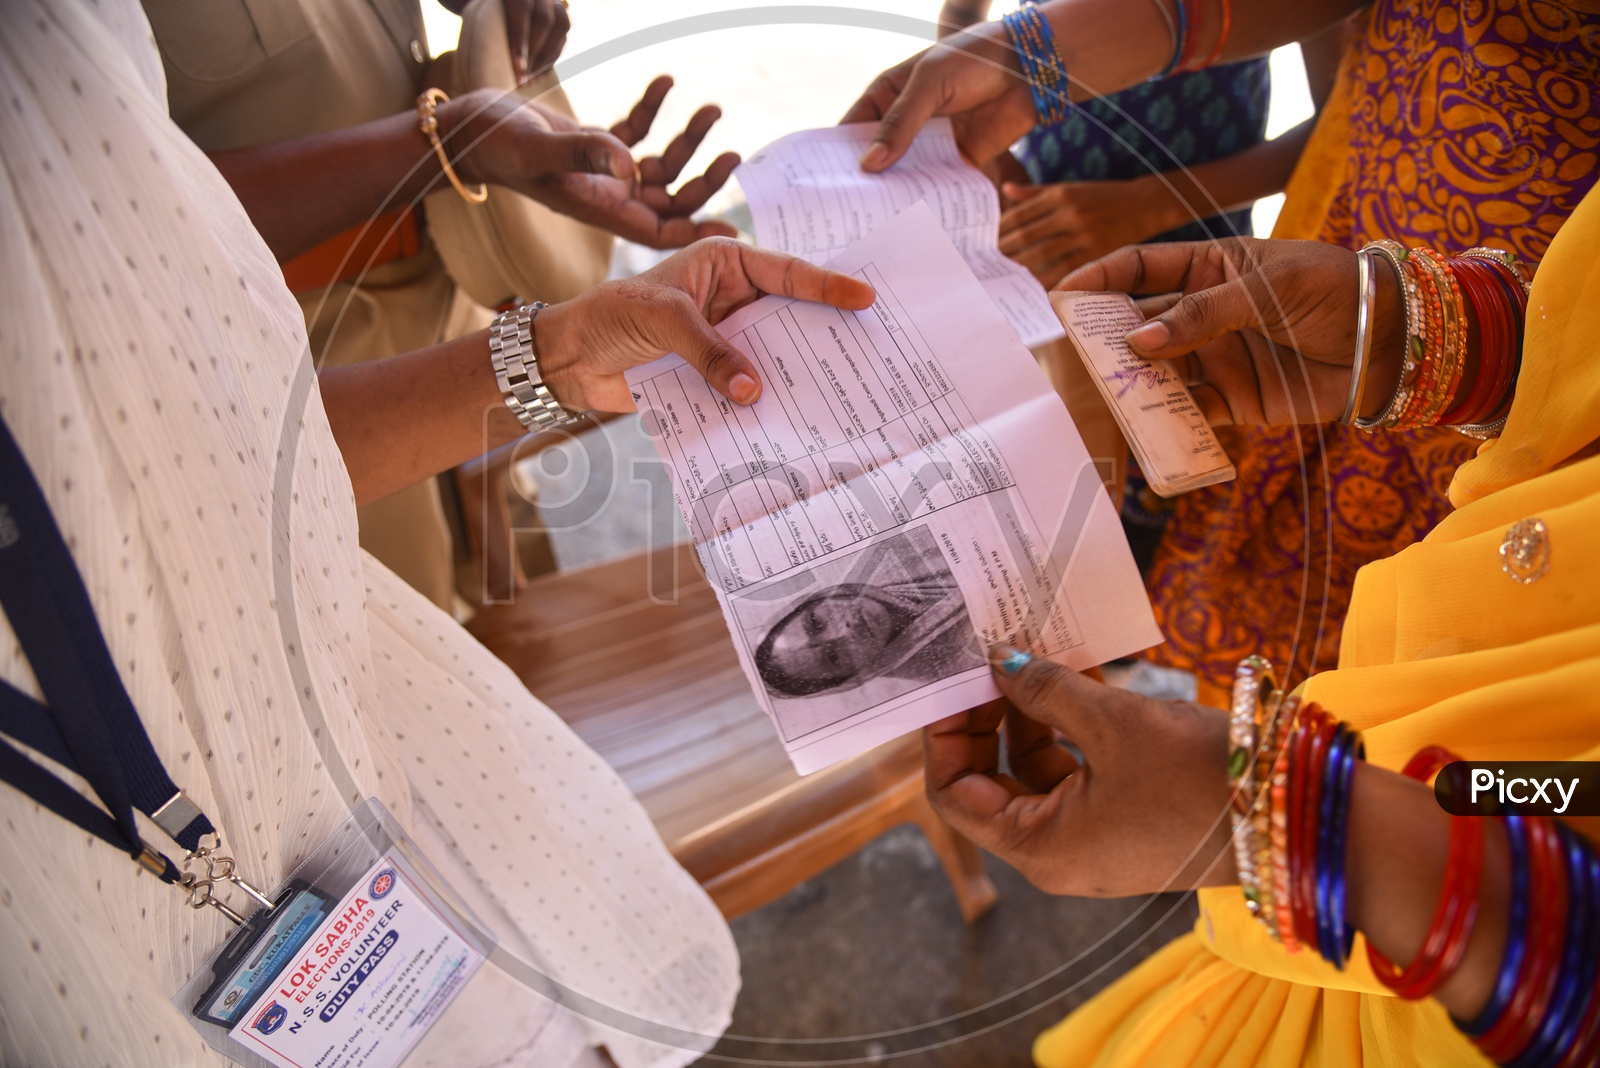 Volunteer checking the Voter Slips and Voter card at a Polling Booth